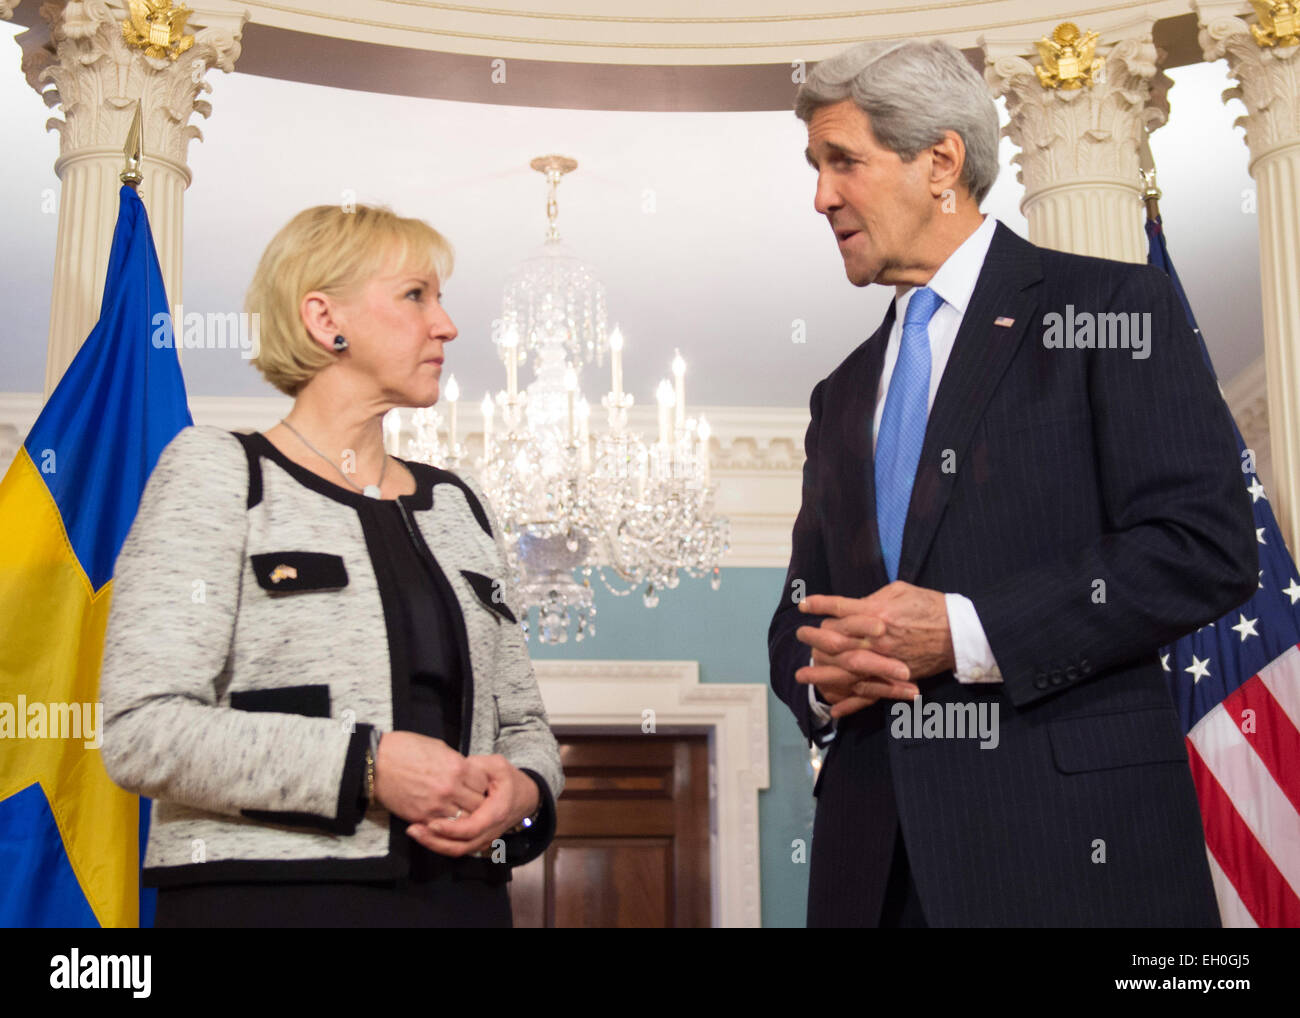 U.S. Secretary of State John Kerry and Swedish Foreign Minister Margot Wallstrom address reporters before their bilateral meeting at the U.S. Department of State in Washington, D.C., on January 29, 2015. Stock Photo